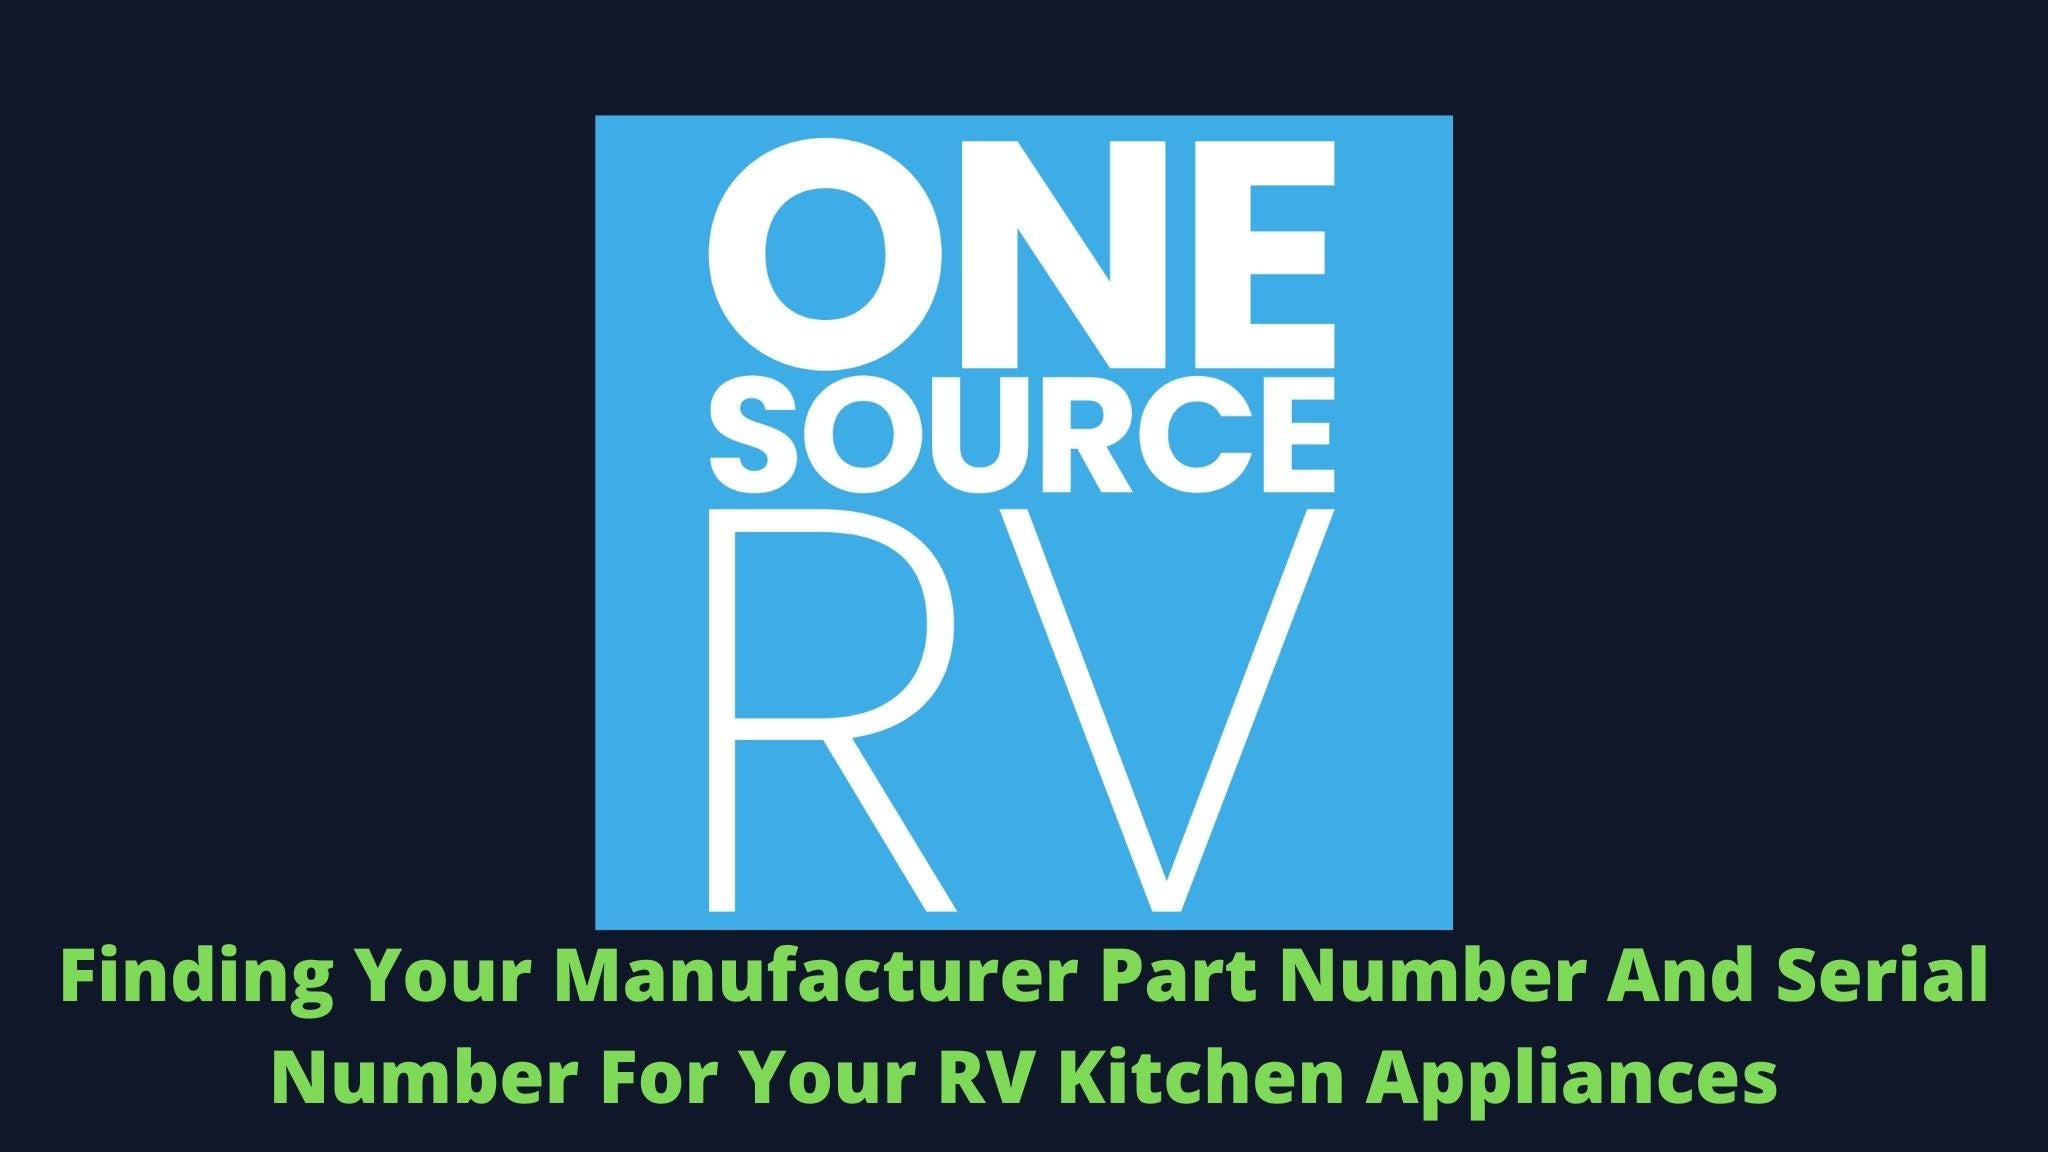 Finding your manufacturer part number and serial number for your RV kitchen appliances